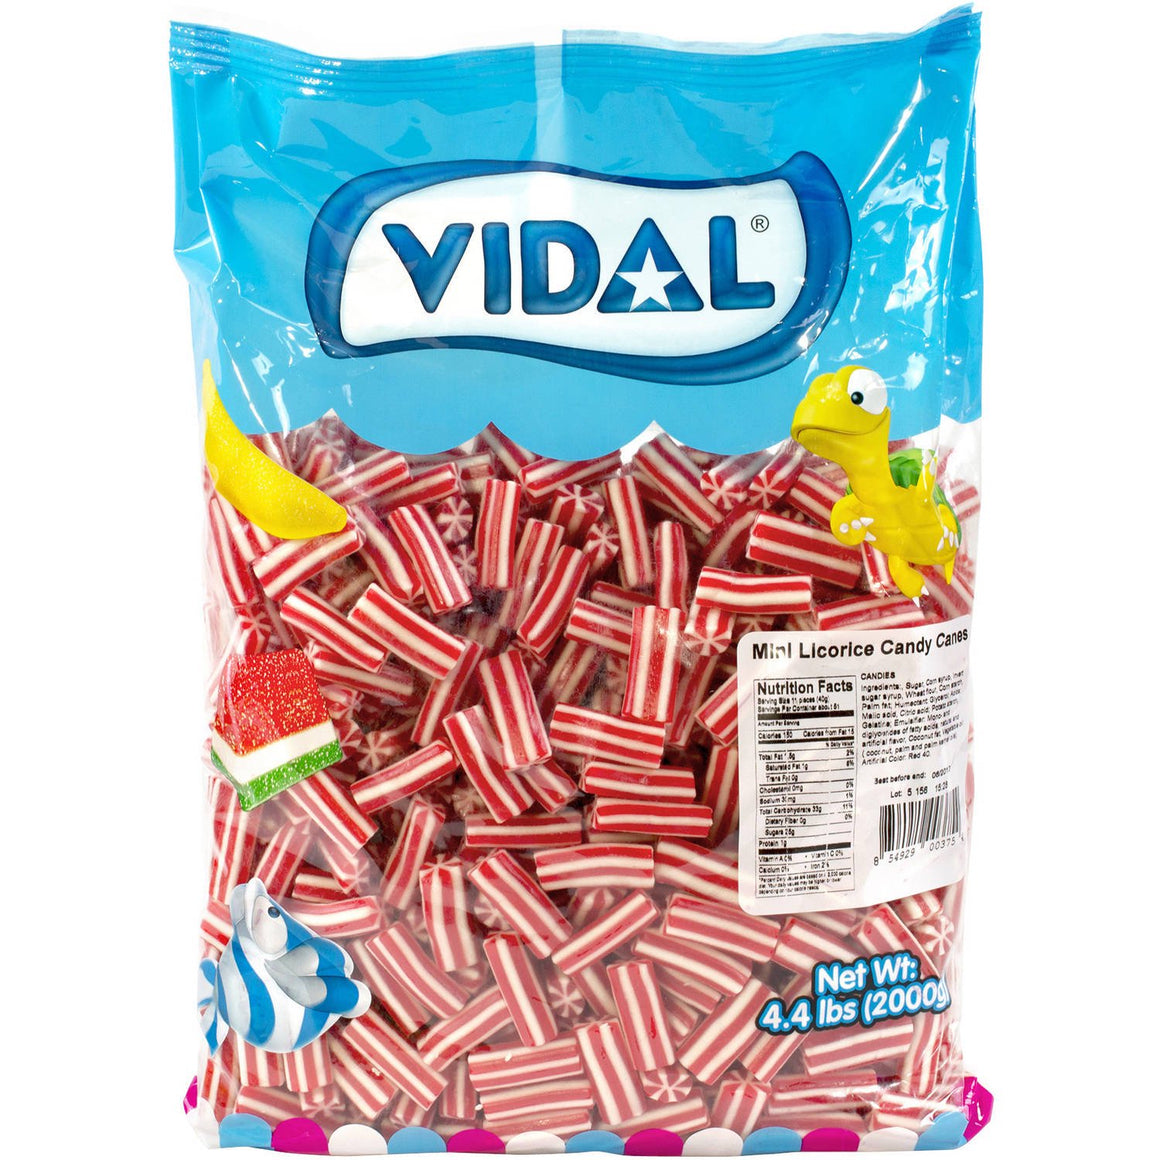 All City Candy Mini Licorice Christmas Candy Cane Gummi Candy - 4.4 lb Bag Vidal For fresh candy and great service, visit www.allcitycandy.com